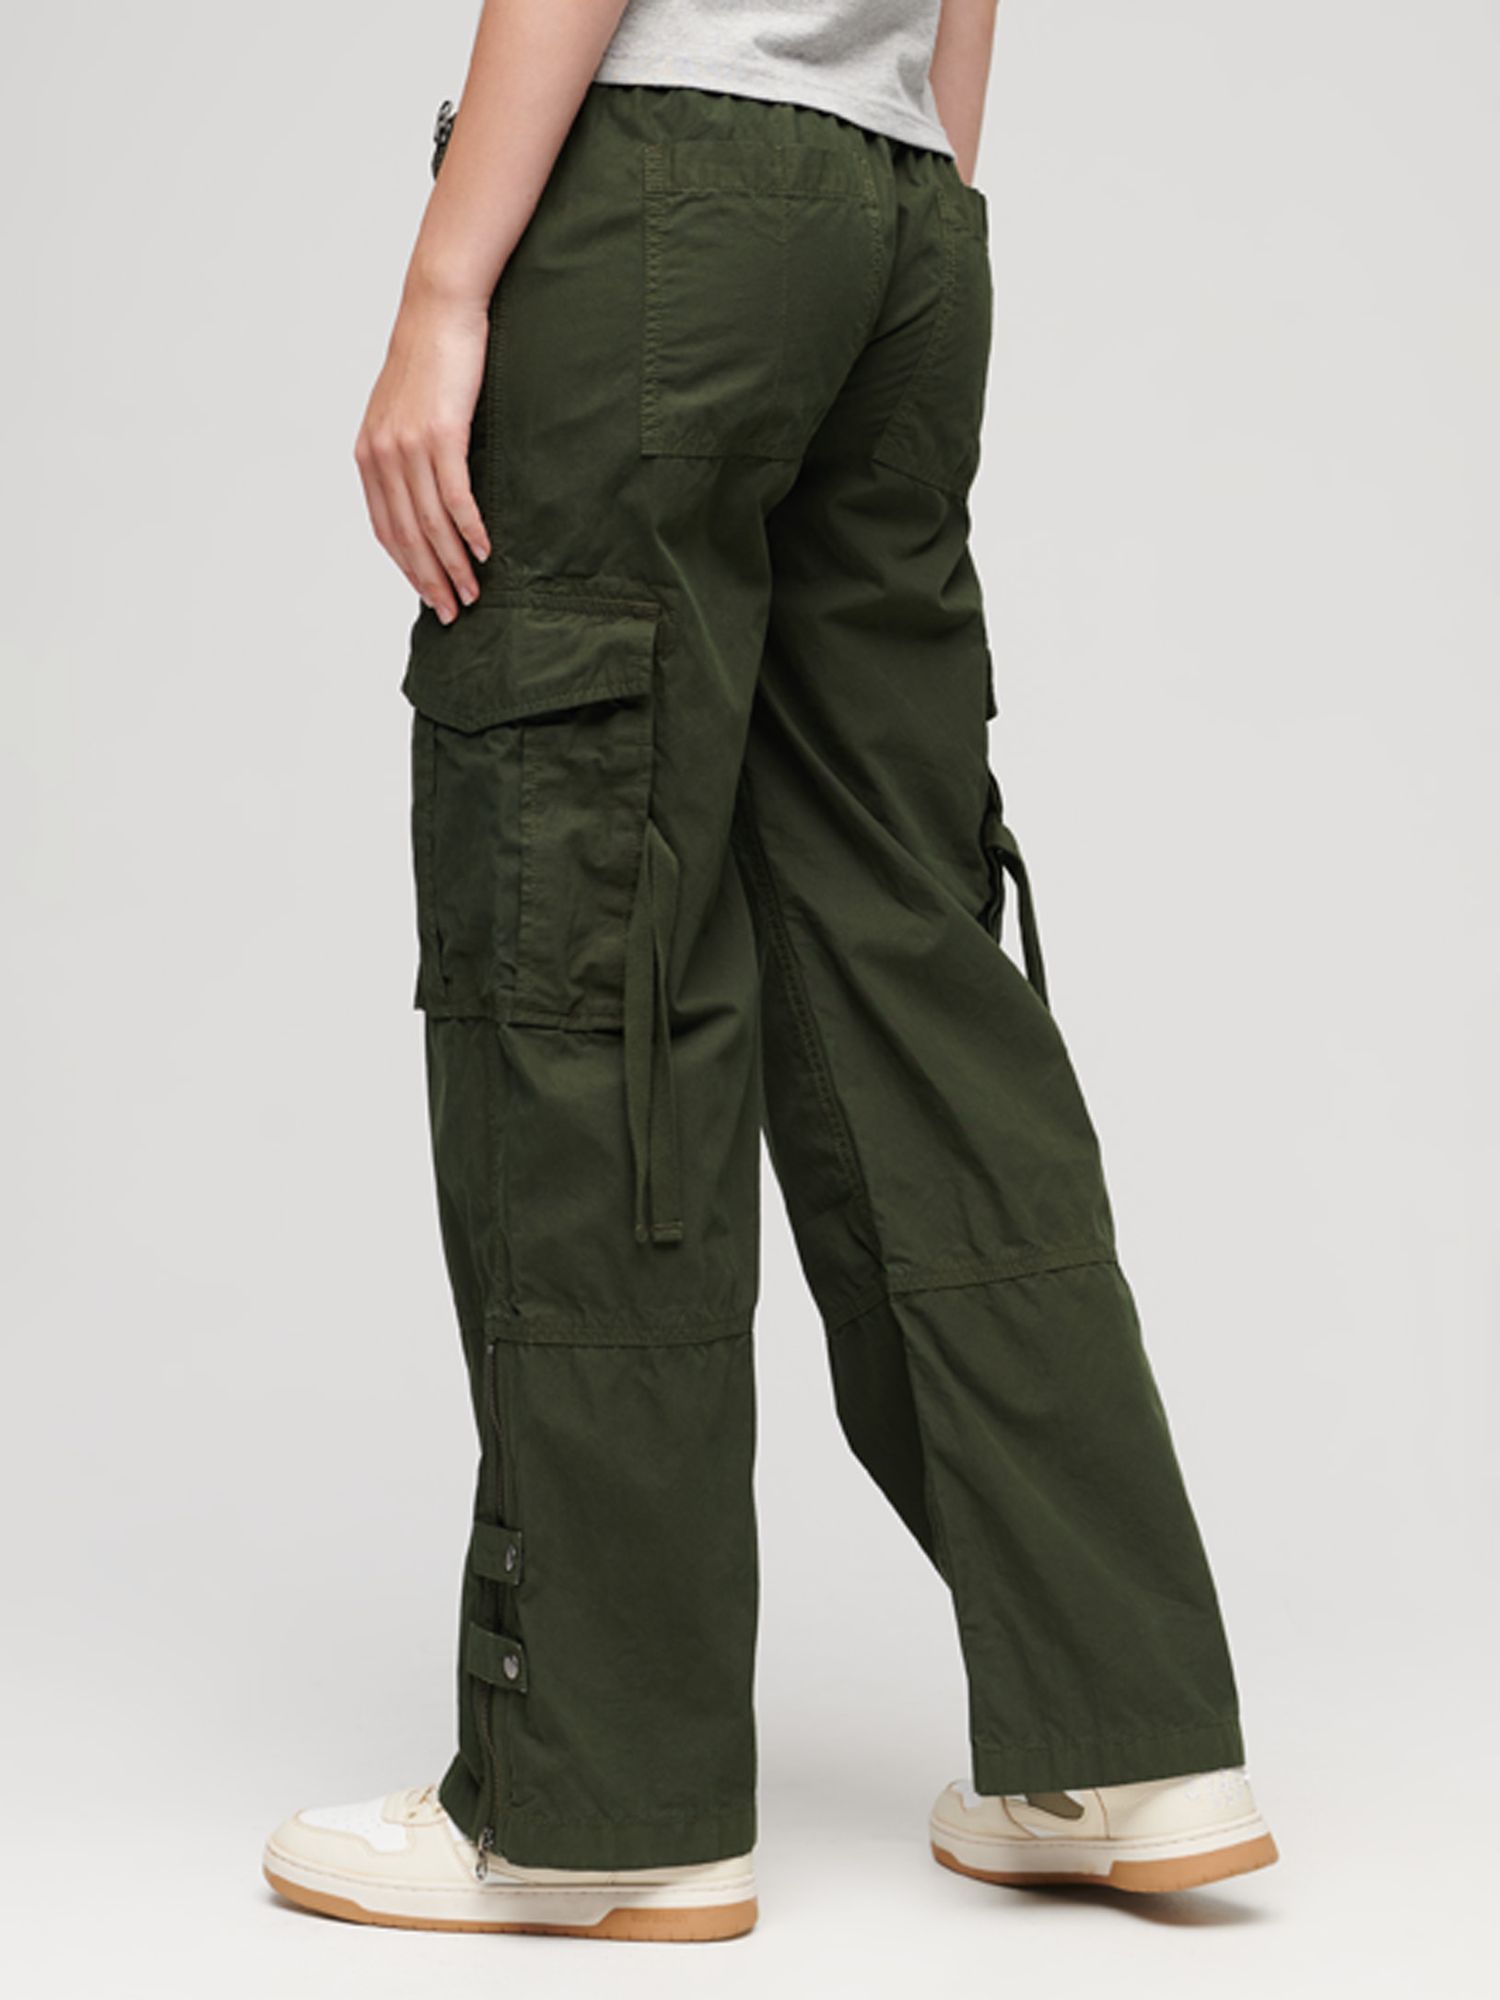 Superdry Low Rise Wide Leg Cargo Trousers, Surplus Goods Olive Green, 26